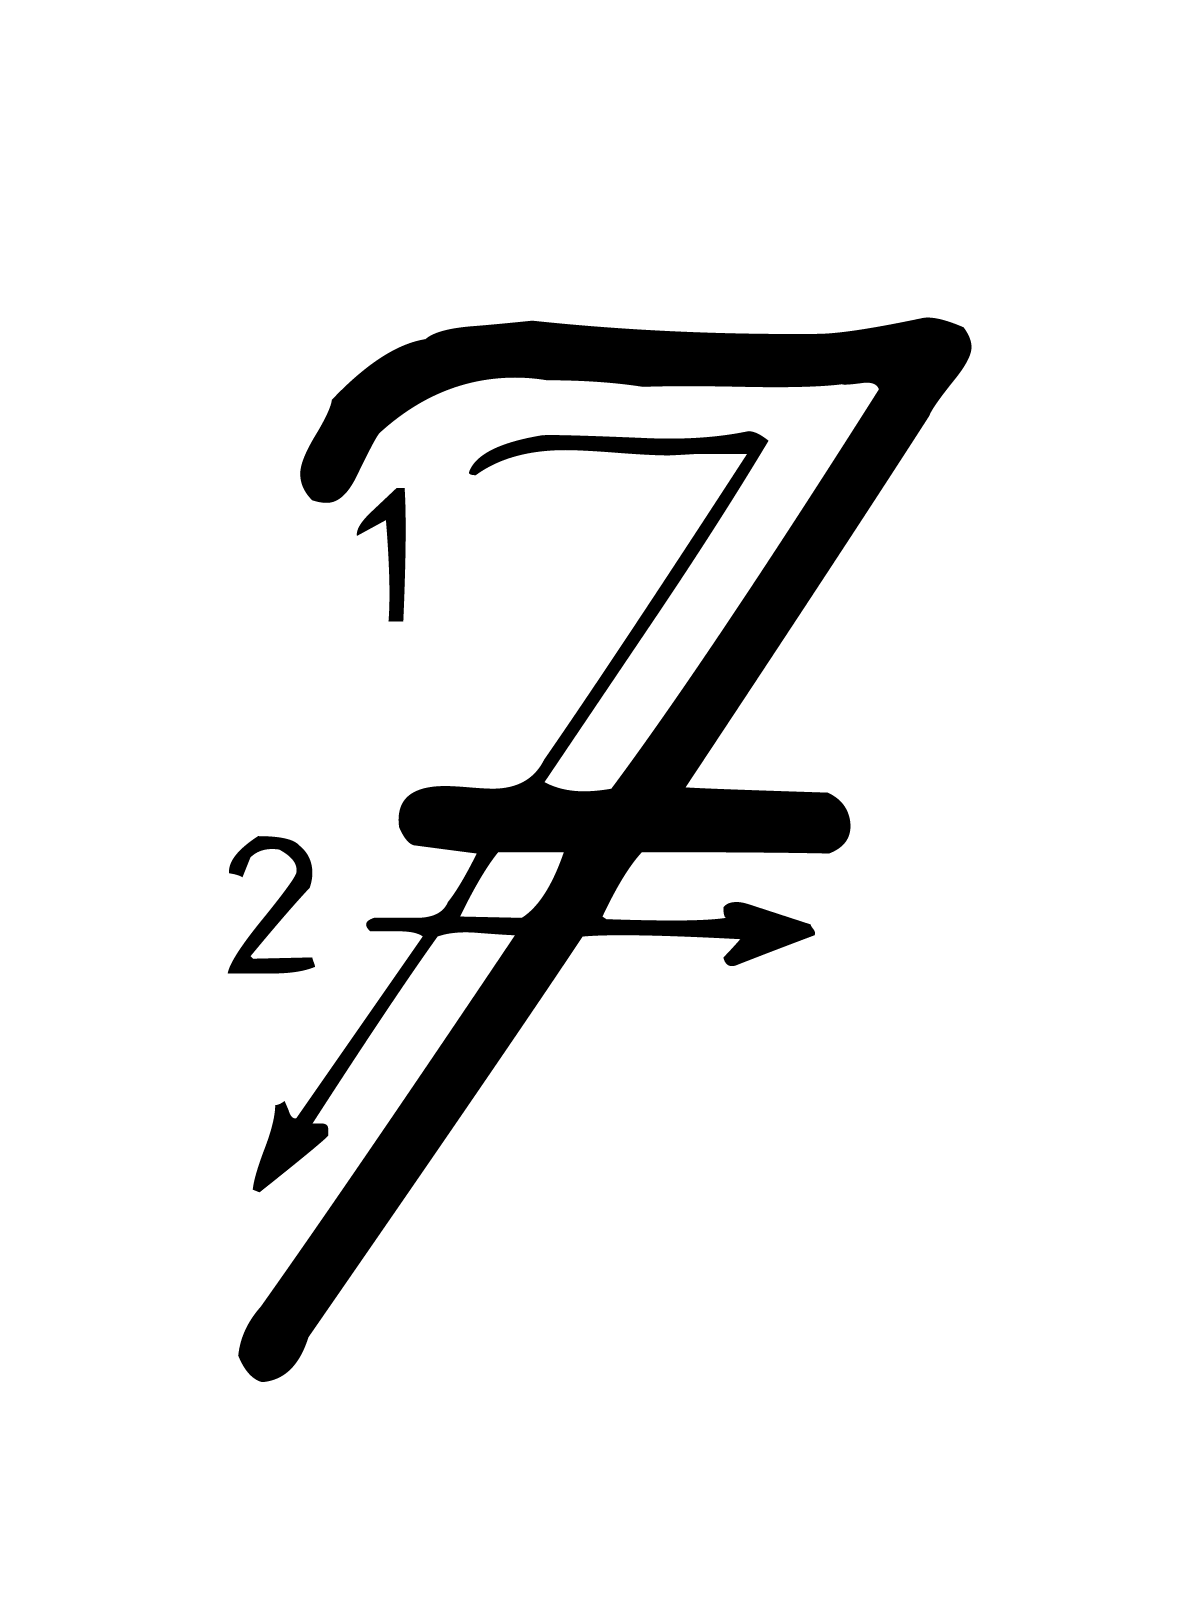 Letters and numbers - Number 7 (seven) with indications cursive movement